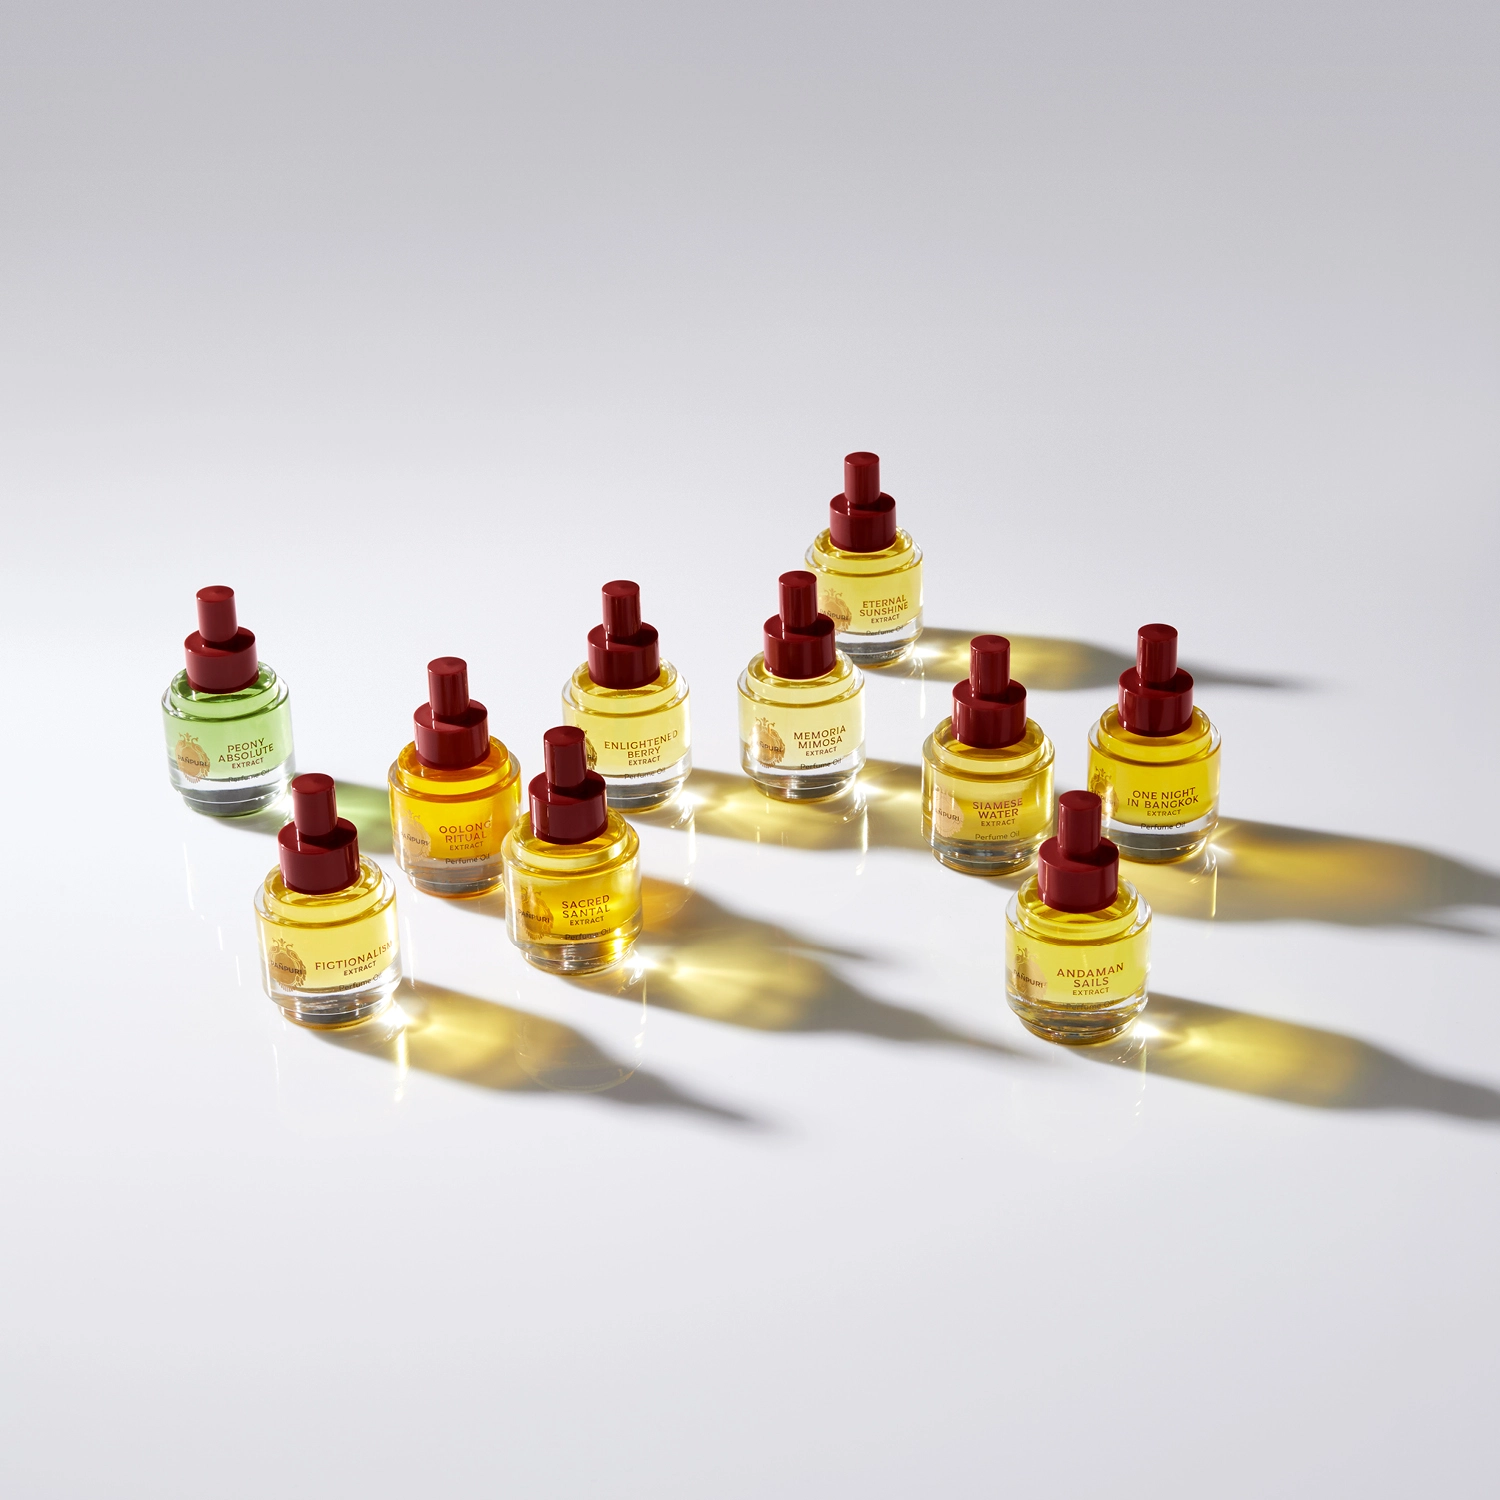 The Story of the Perfume Oil